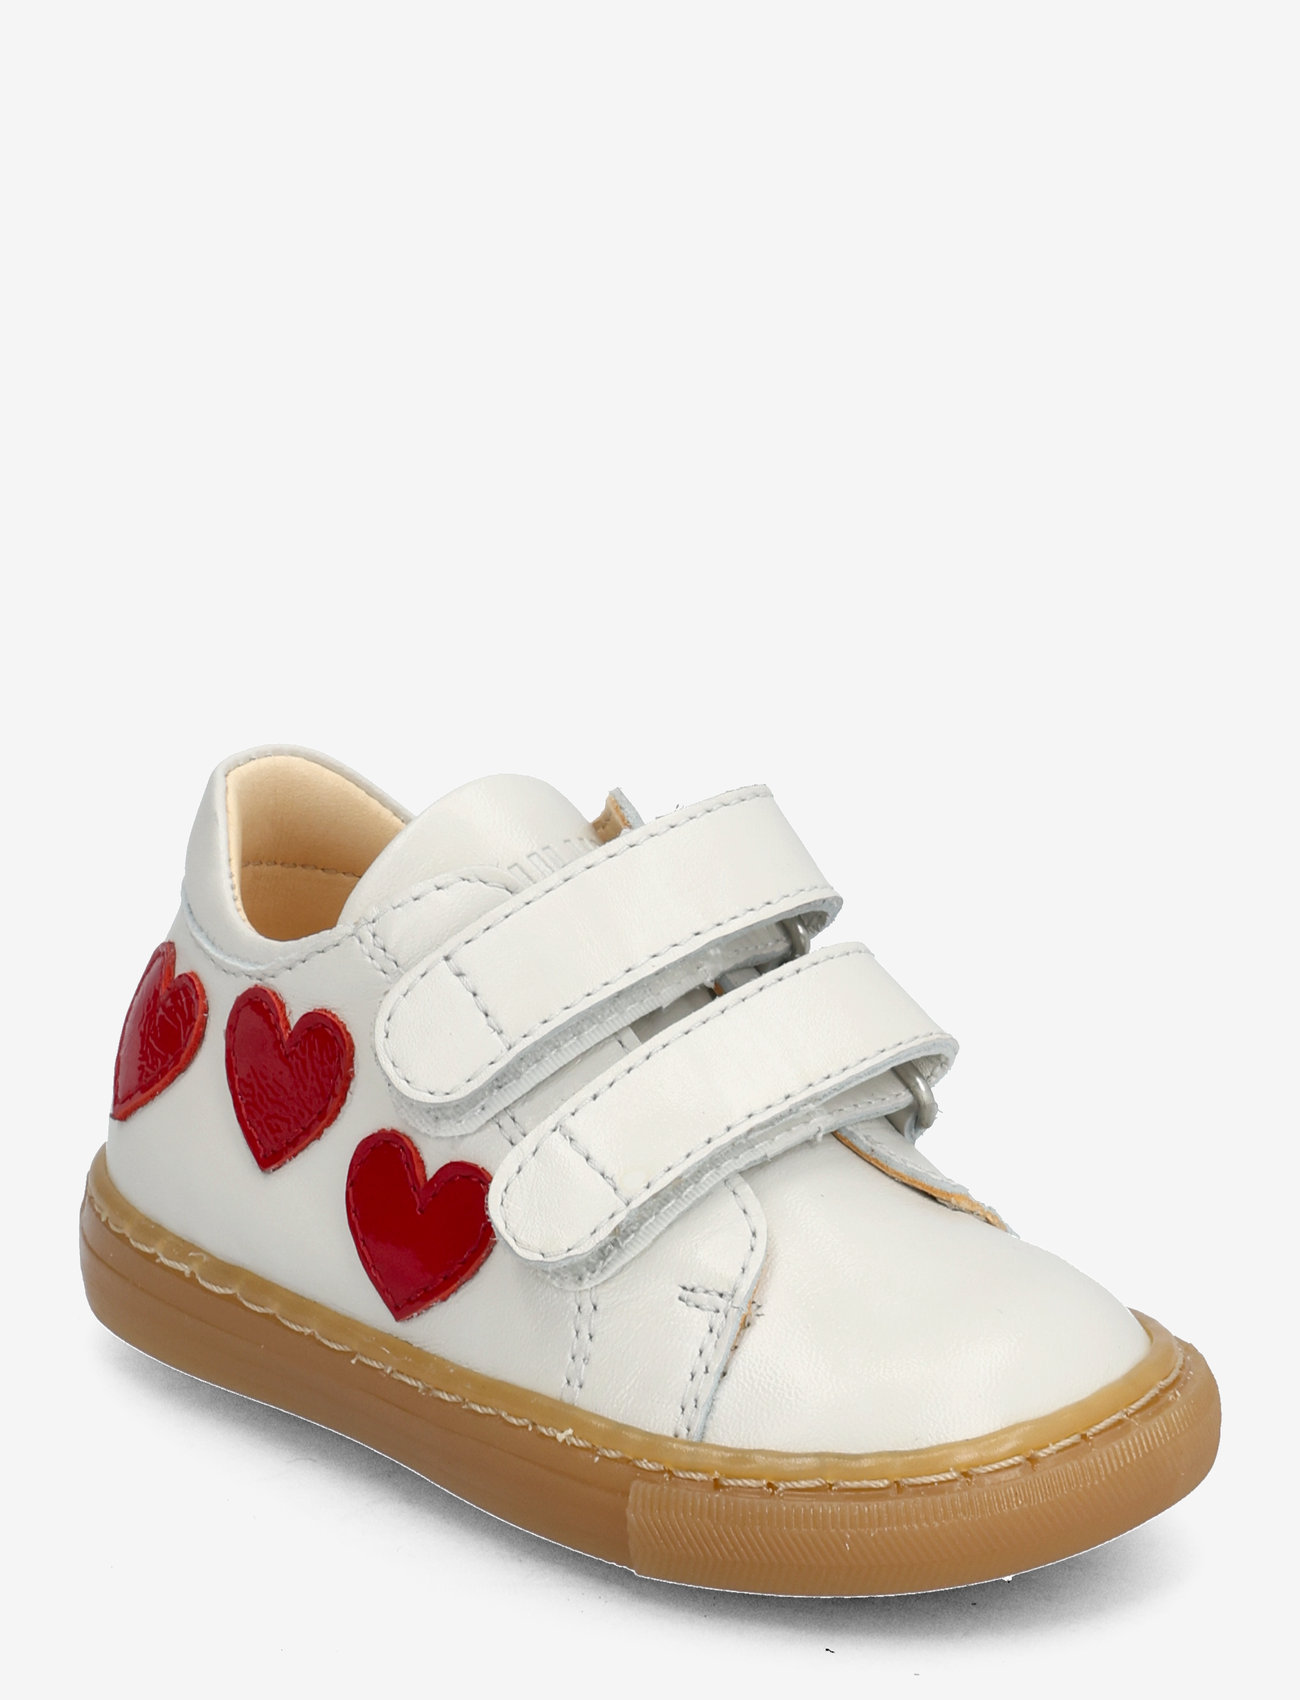 ANGULUS - Shoes - flat - with velcro - vasaros pasiūlymai - 1493/a003 off white/hearts - 0